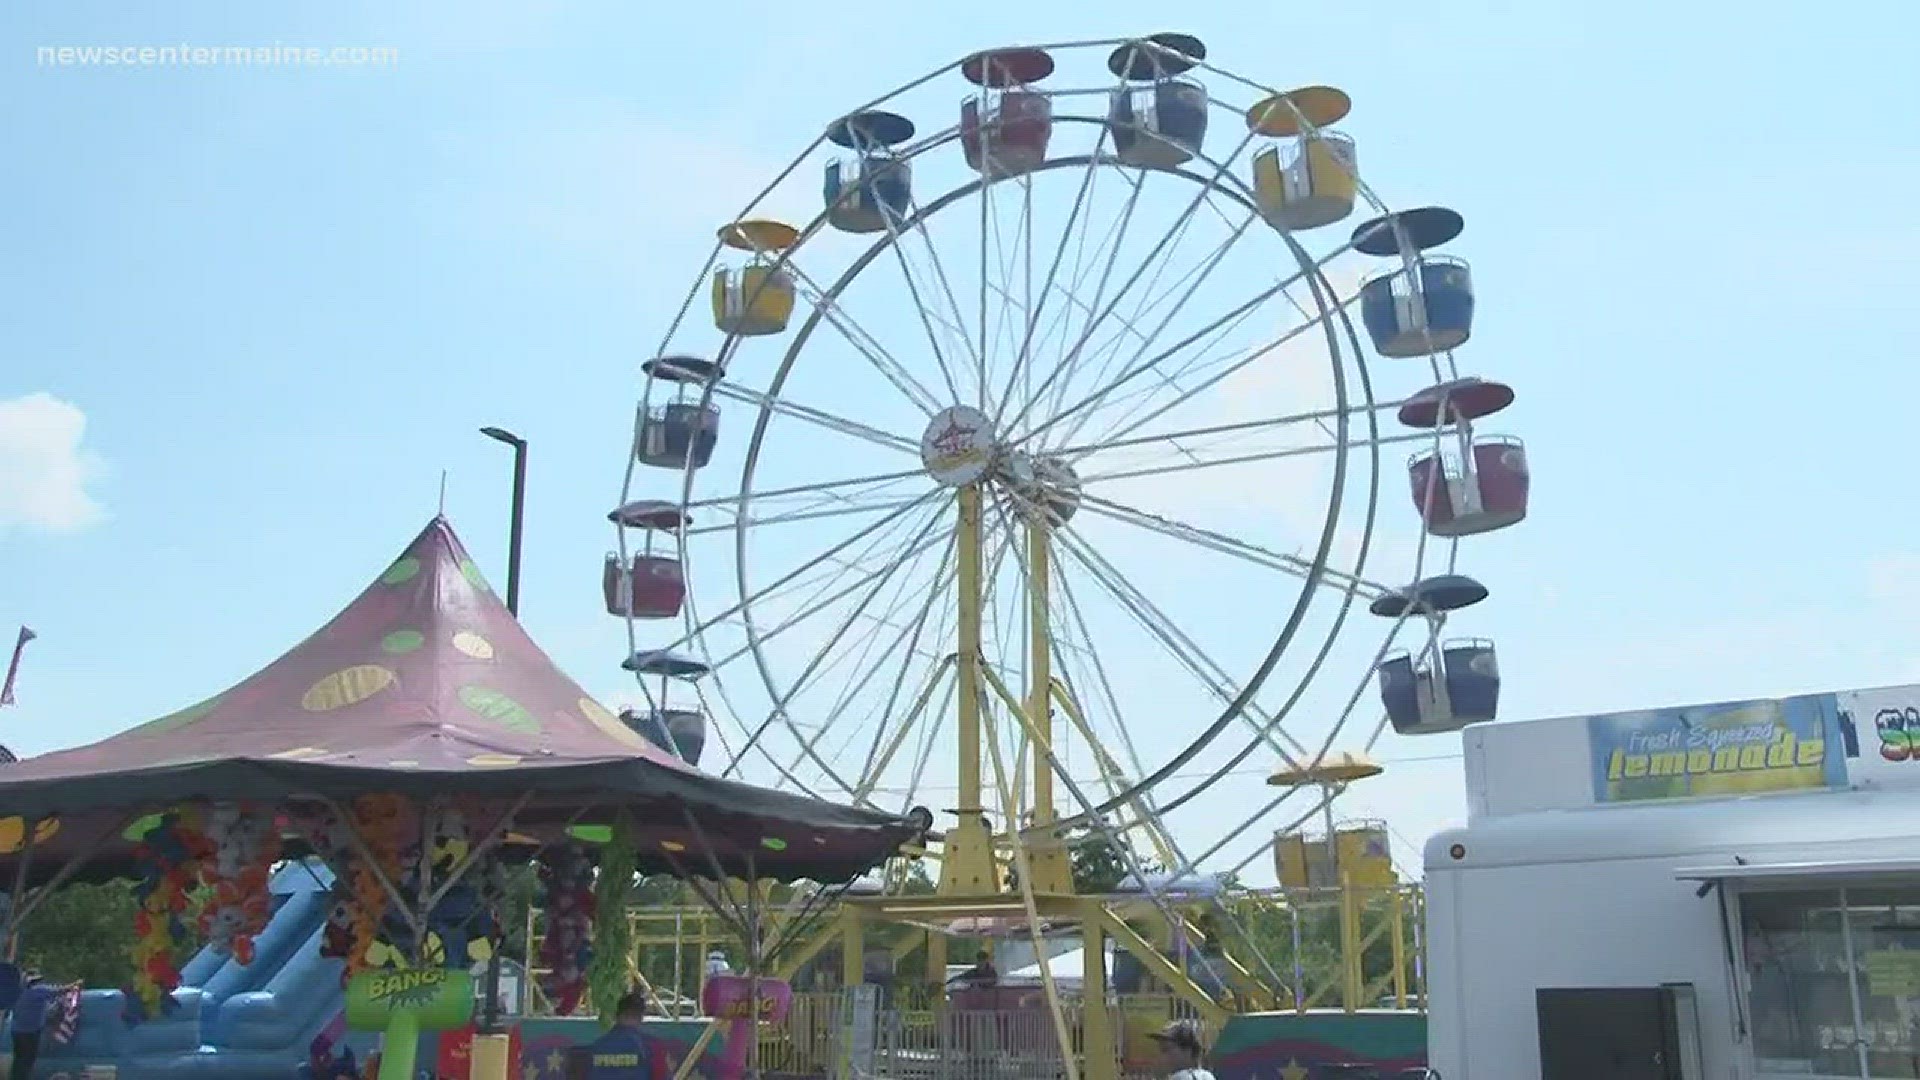 Crunching numbers: Attendance at State fairs